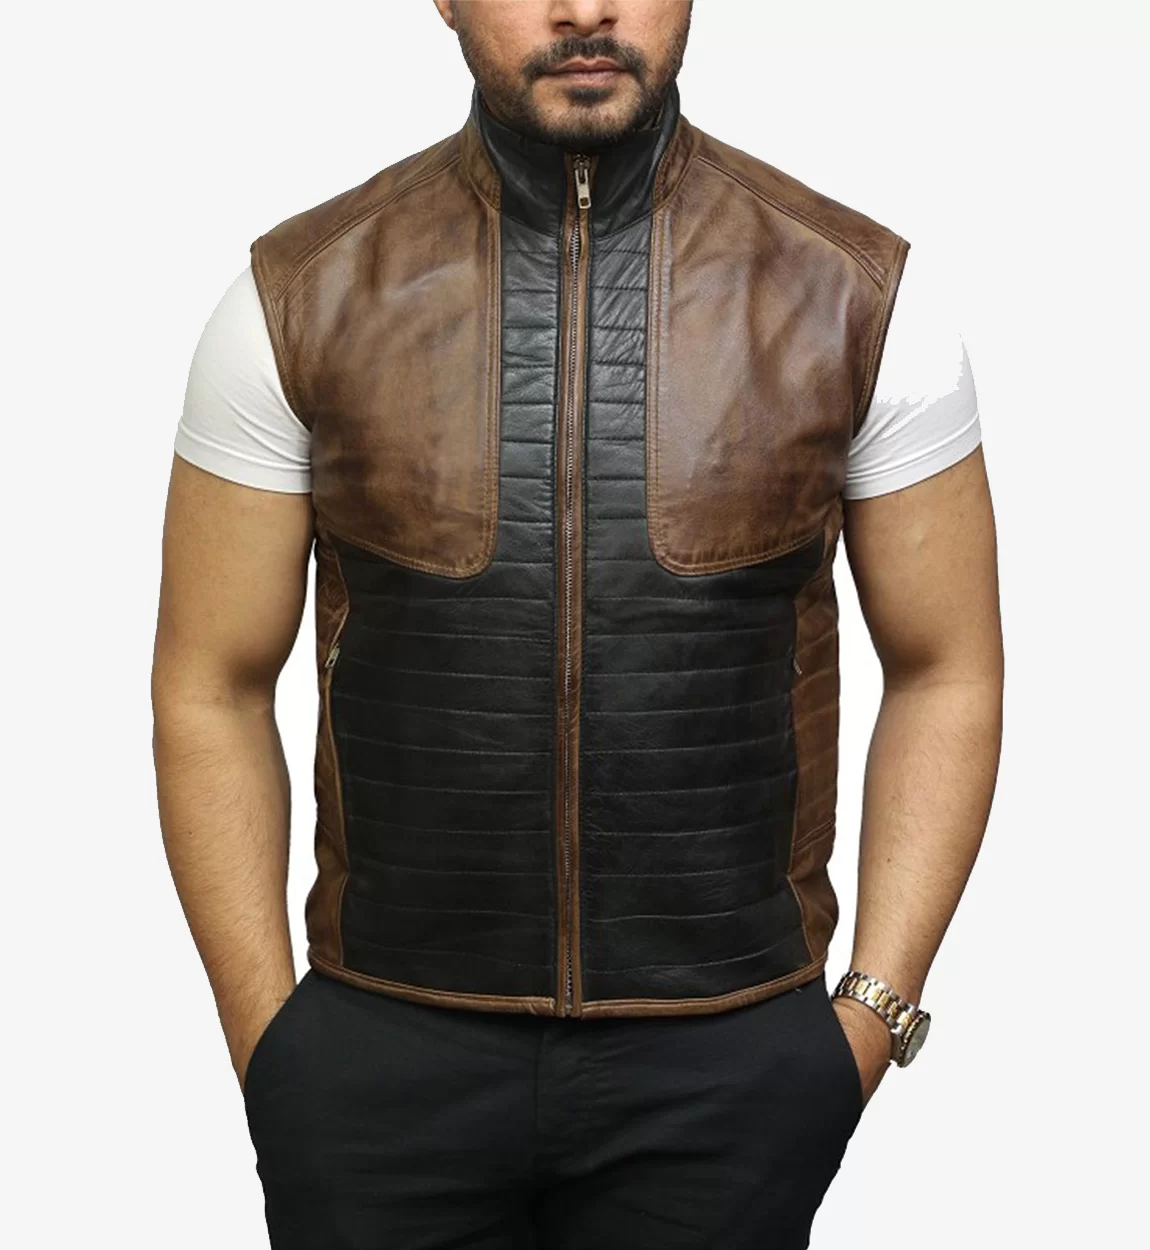 Mens-Body-Warmer-Black-and-Brown-Real-Leather-Vest.webp